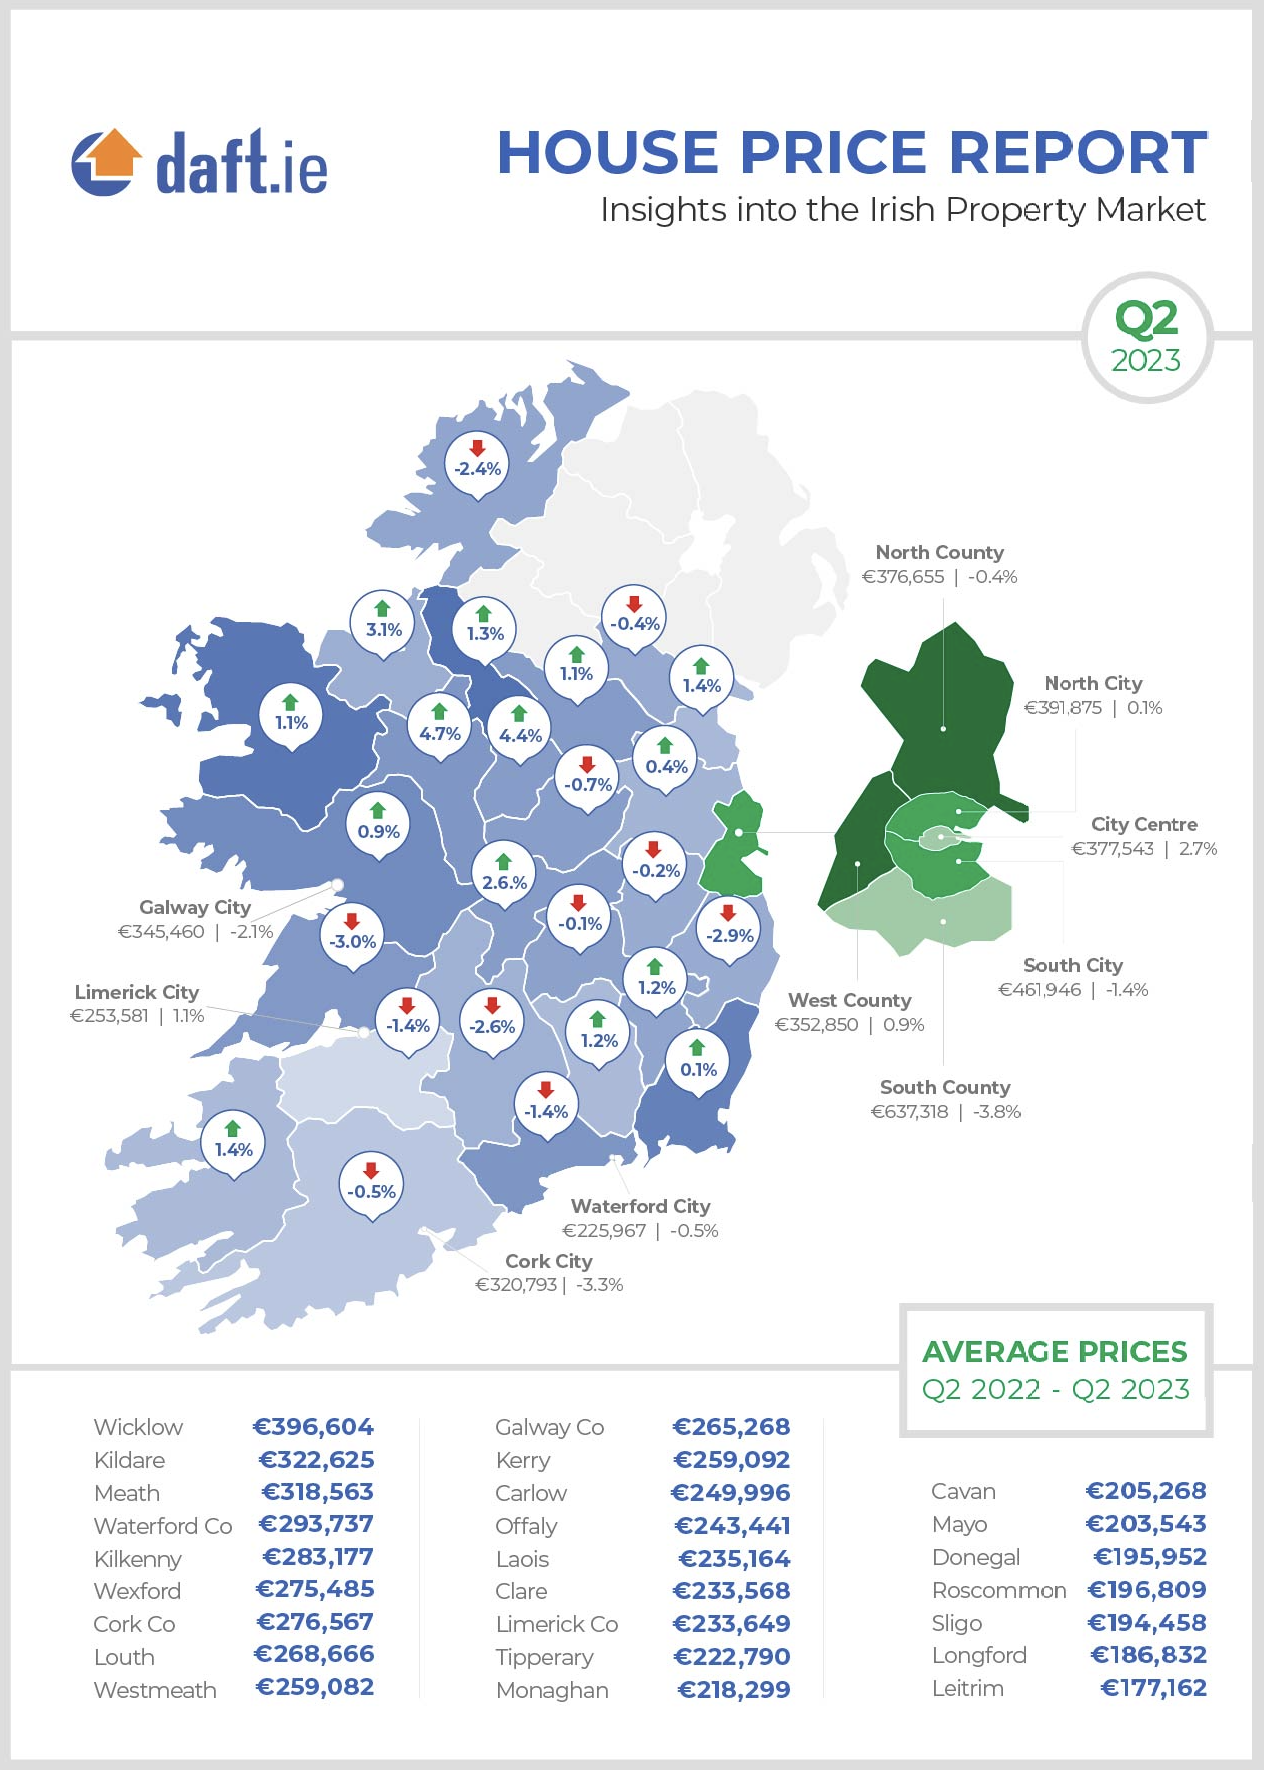 https://www.worldpropertyjournal.com/news-assets-2/Maps%20-%20Daft.ie%20House%20Price%20Report%20Q2%202023.png